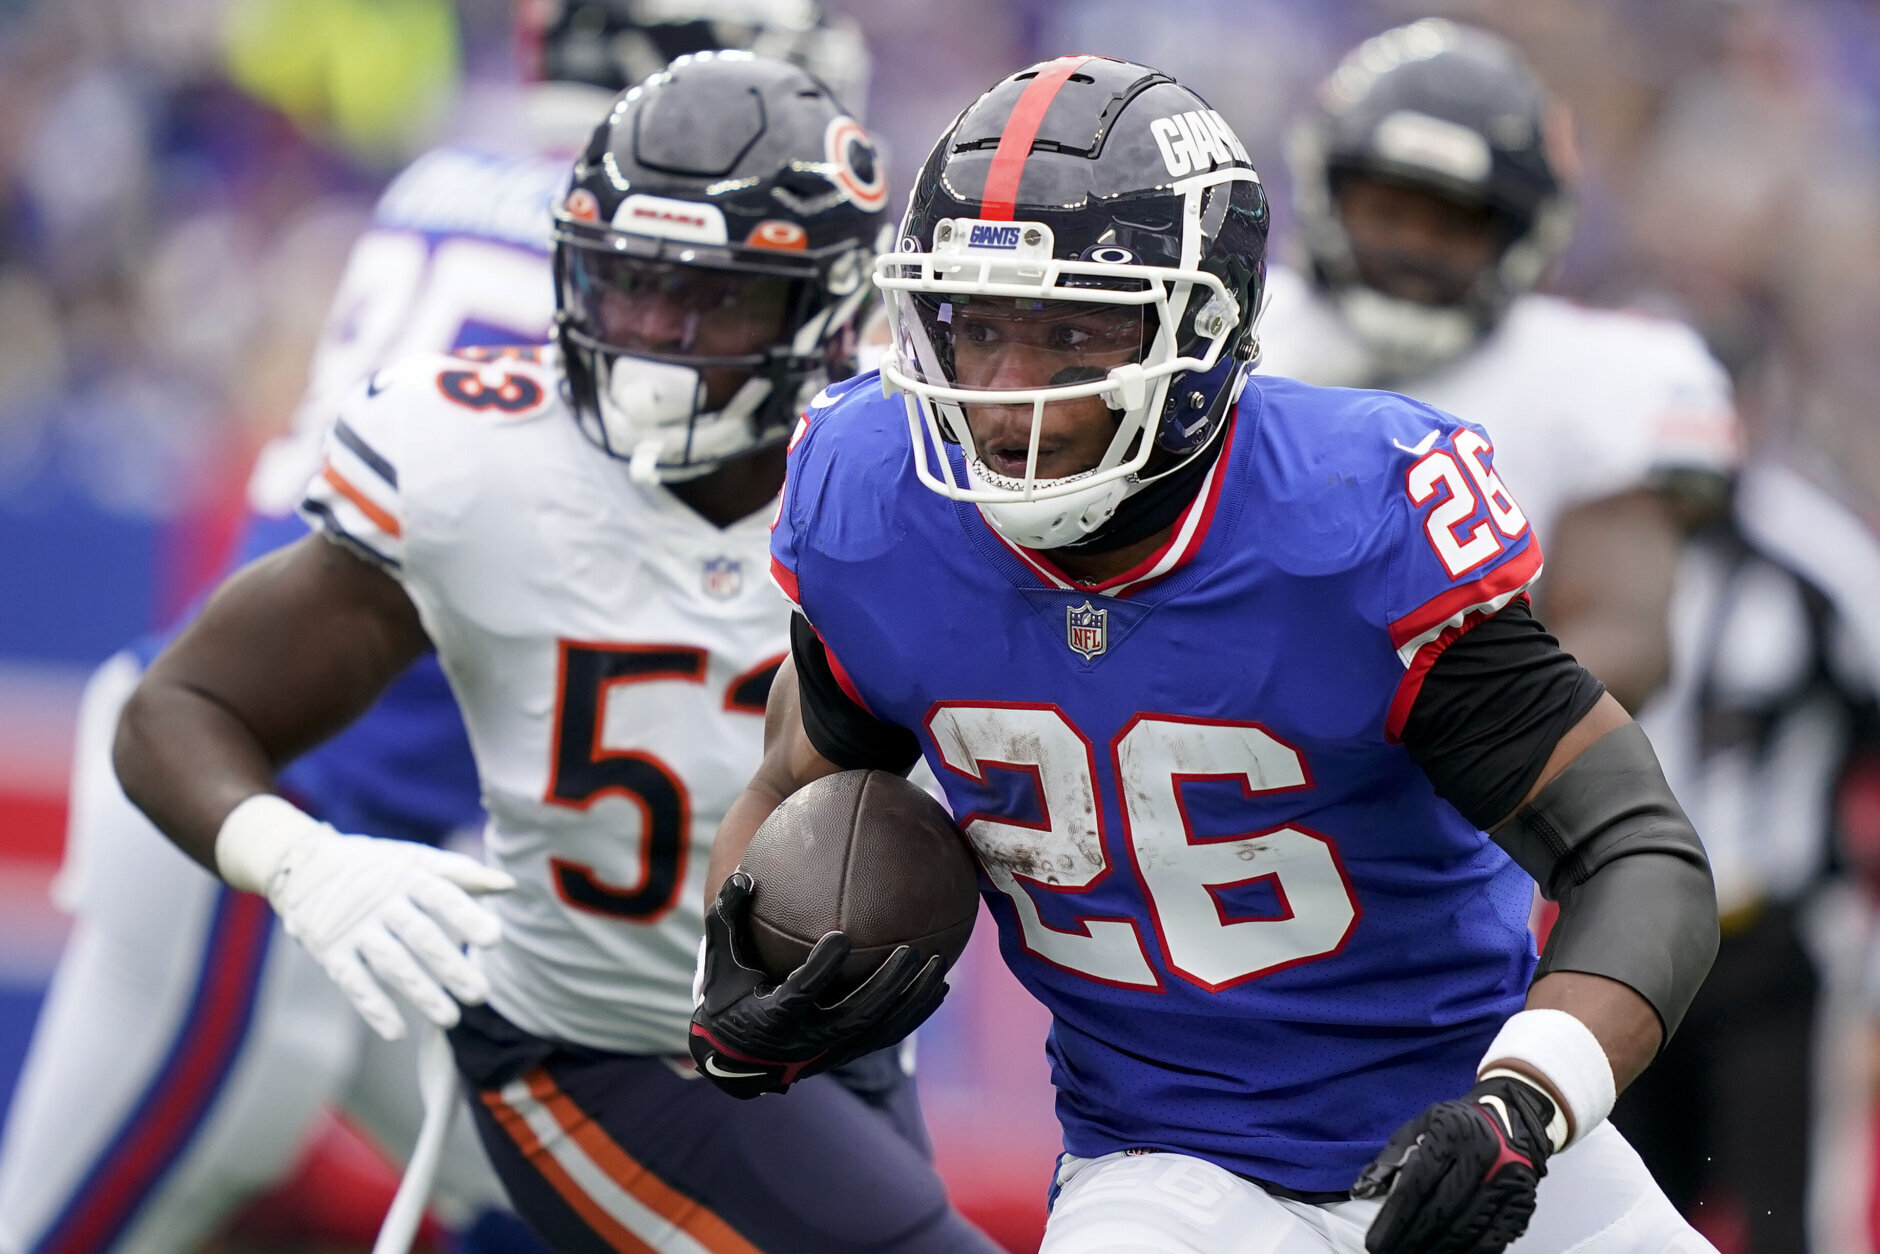 <p><b><i>Bears 12</i></b><br />
<b><i>Giants 20</i></b></p>
<p>Chicago&#8217;s <a href="https://profootballtalk.nbcsports.com/2022/09/26/justin-fields-at-the-helm-of-a-historically-inept-bears-passing-offense/" target="_blank" rel="noopener">historically inept passing attack</a> was so bad that it didn&#8217;t even matter that New York literally ran out of QBs. The Bears are as underwhelming as Saquon Barkley is impressive for the Giants through four games. This dude should be getting MVP consideration.</p>
